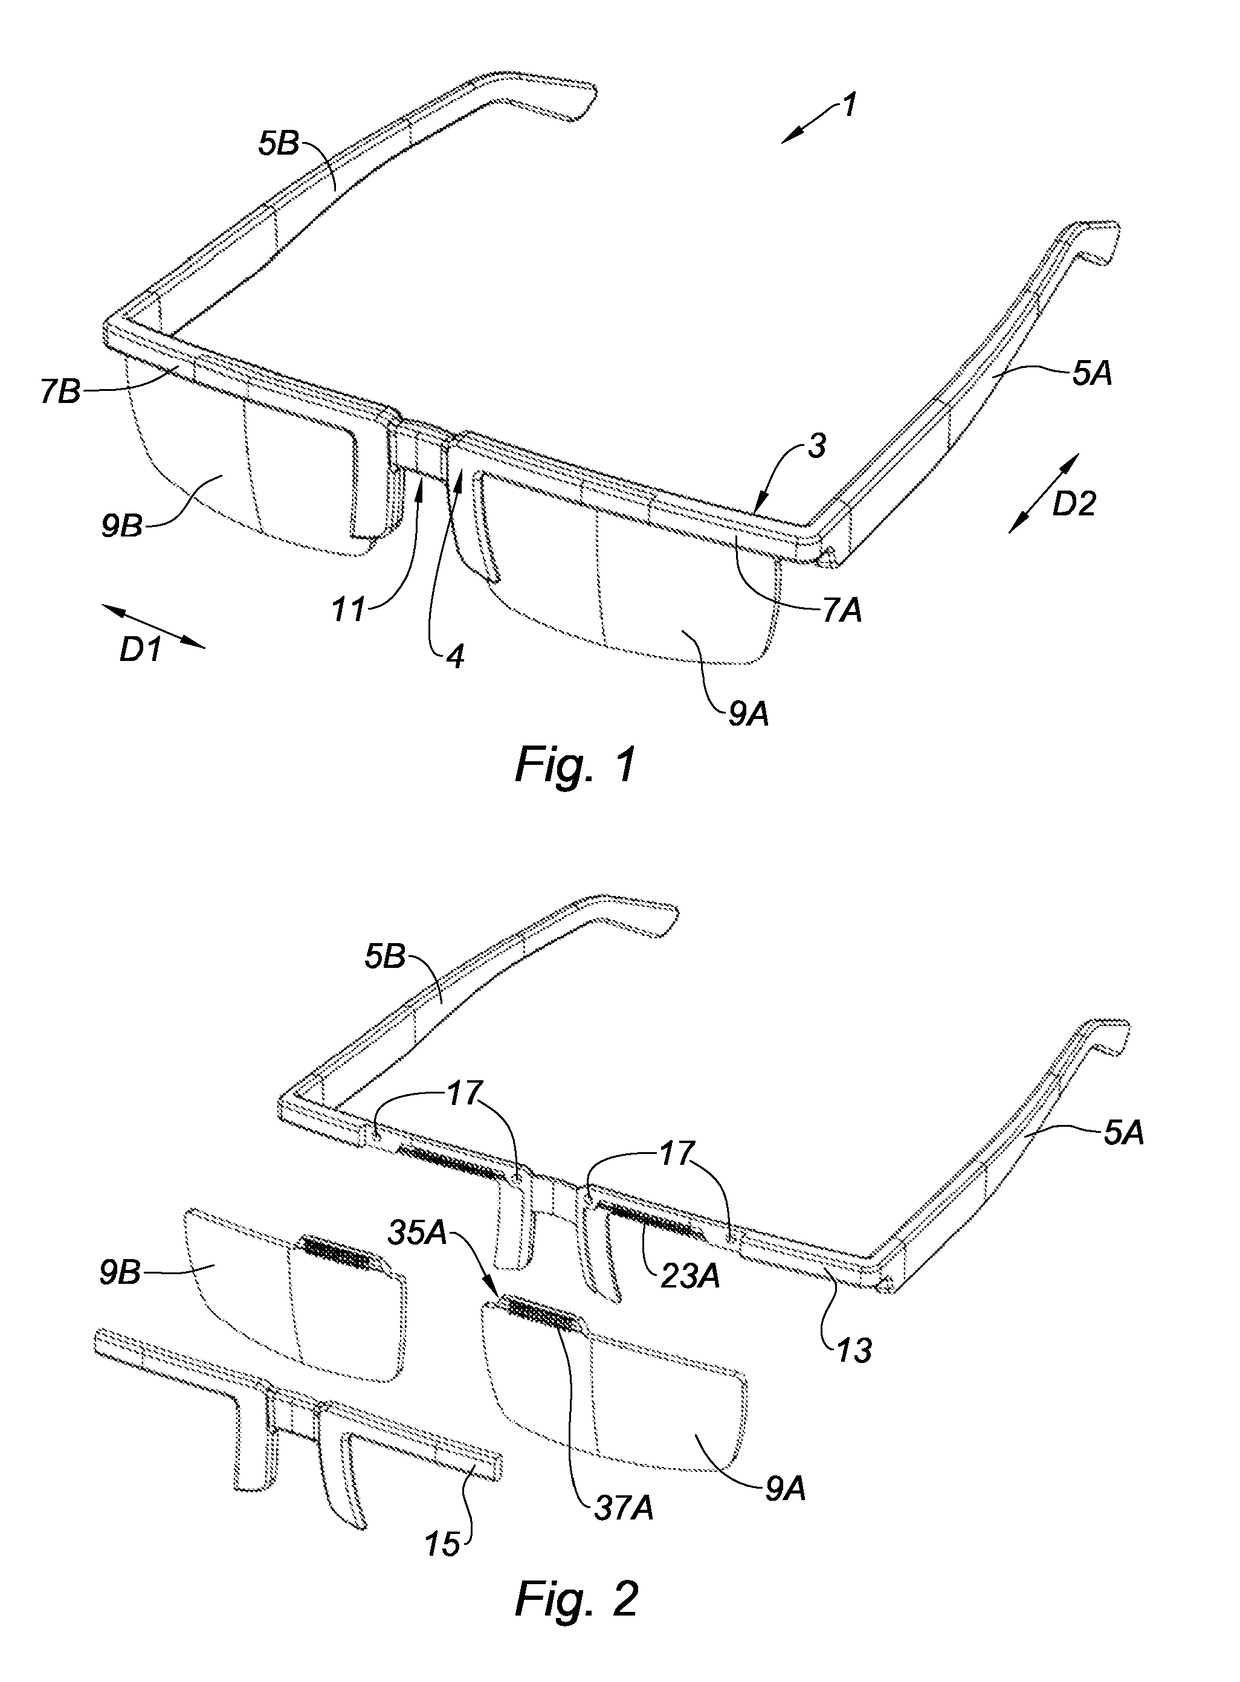 Pair of spectacles adjustable depending on the pupillary distance of an individual